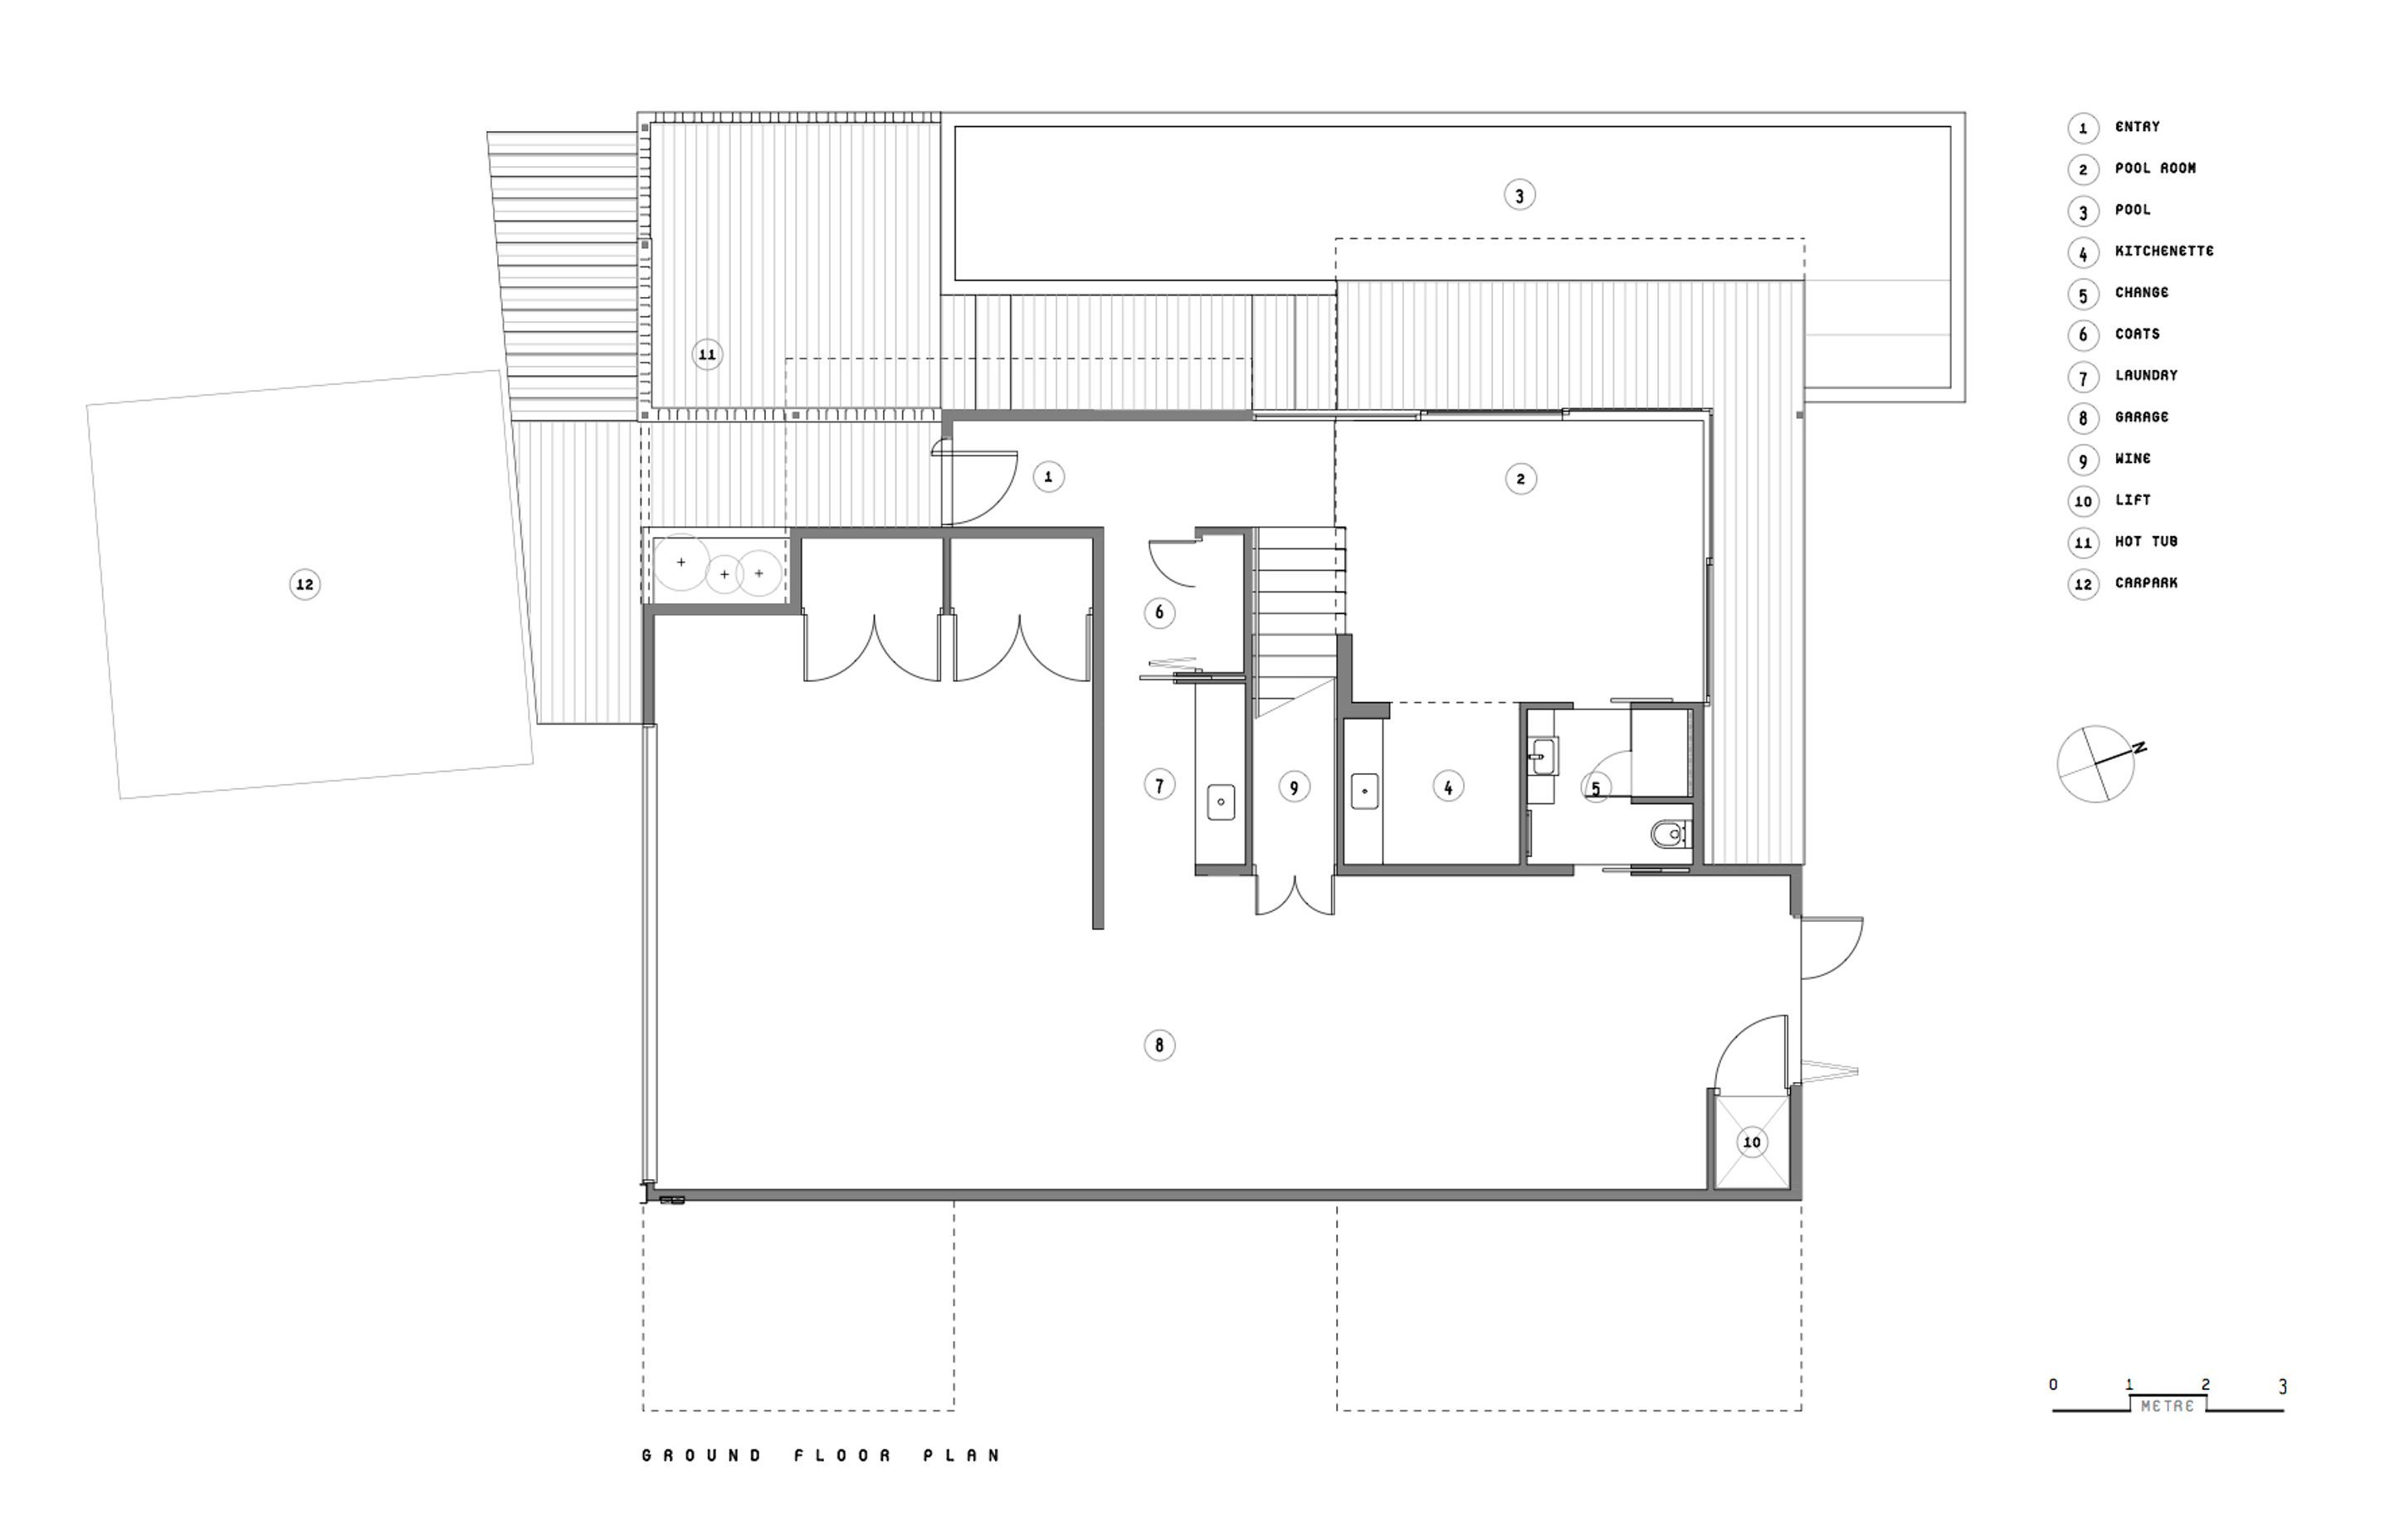 The ground-floor plan by Objects shows the hot tub and lap pool facing northwest.